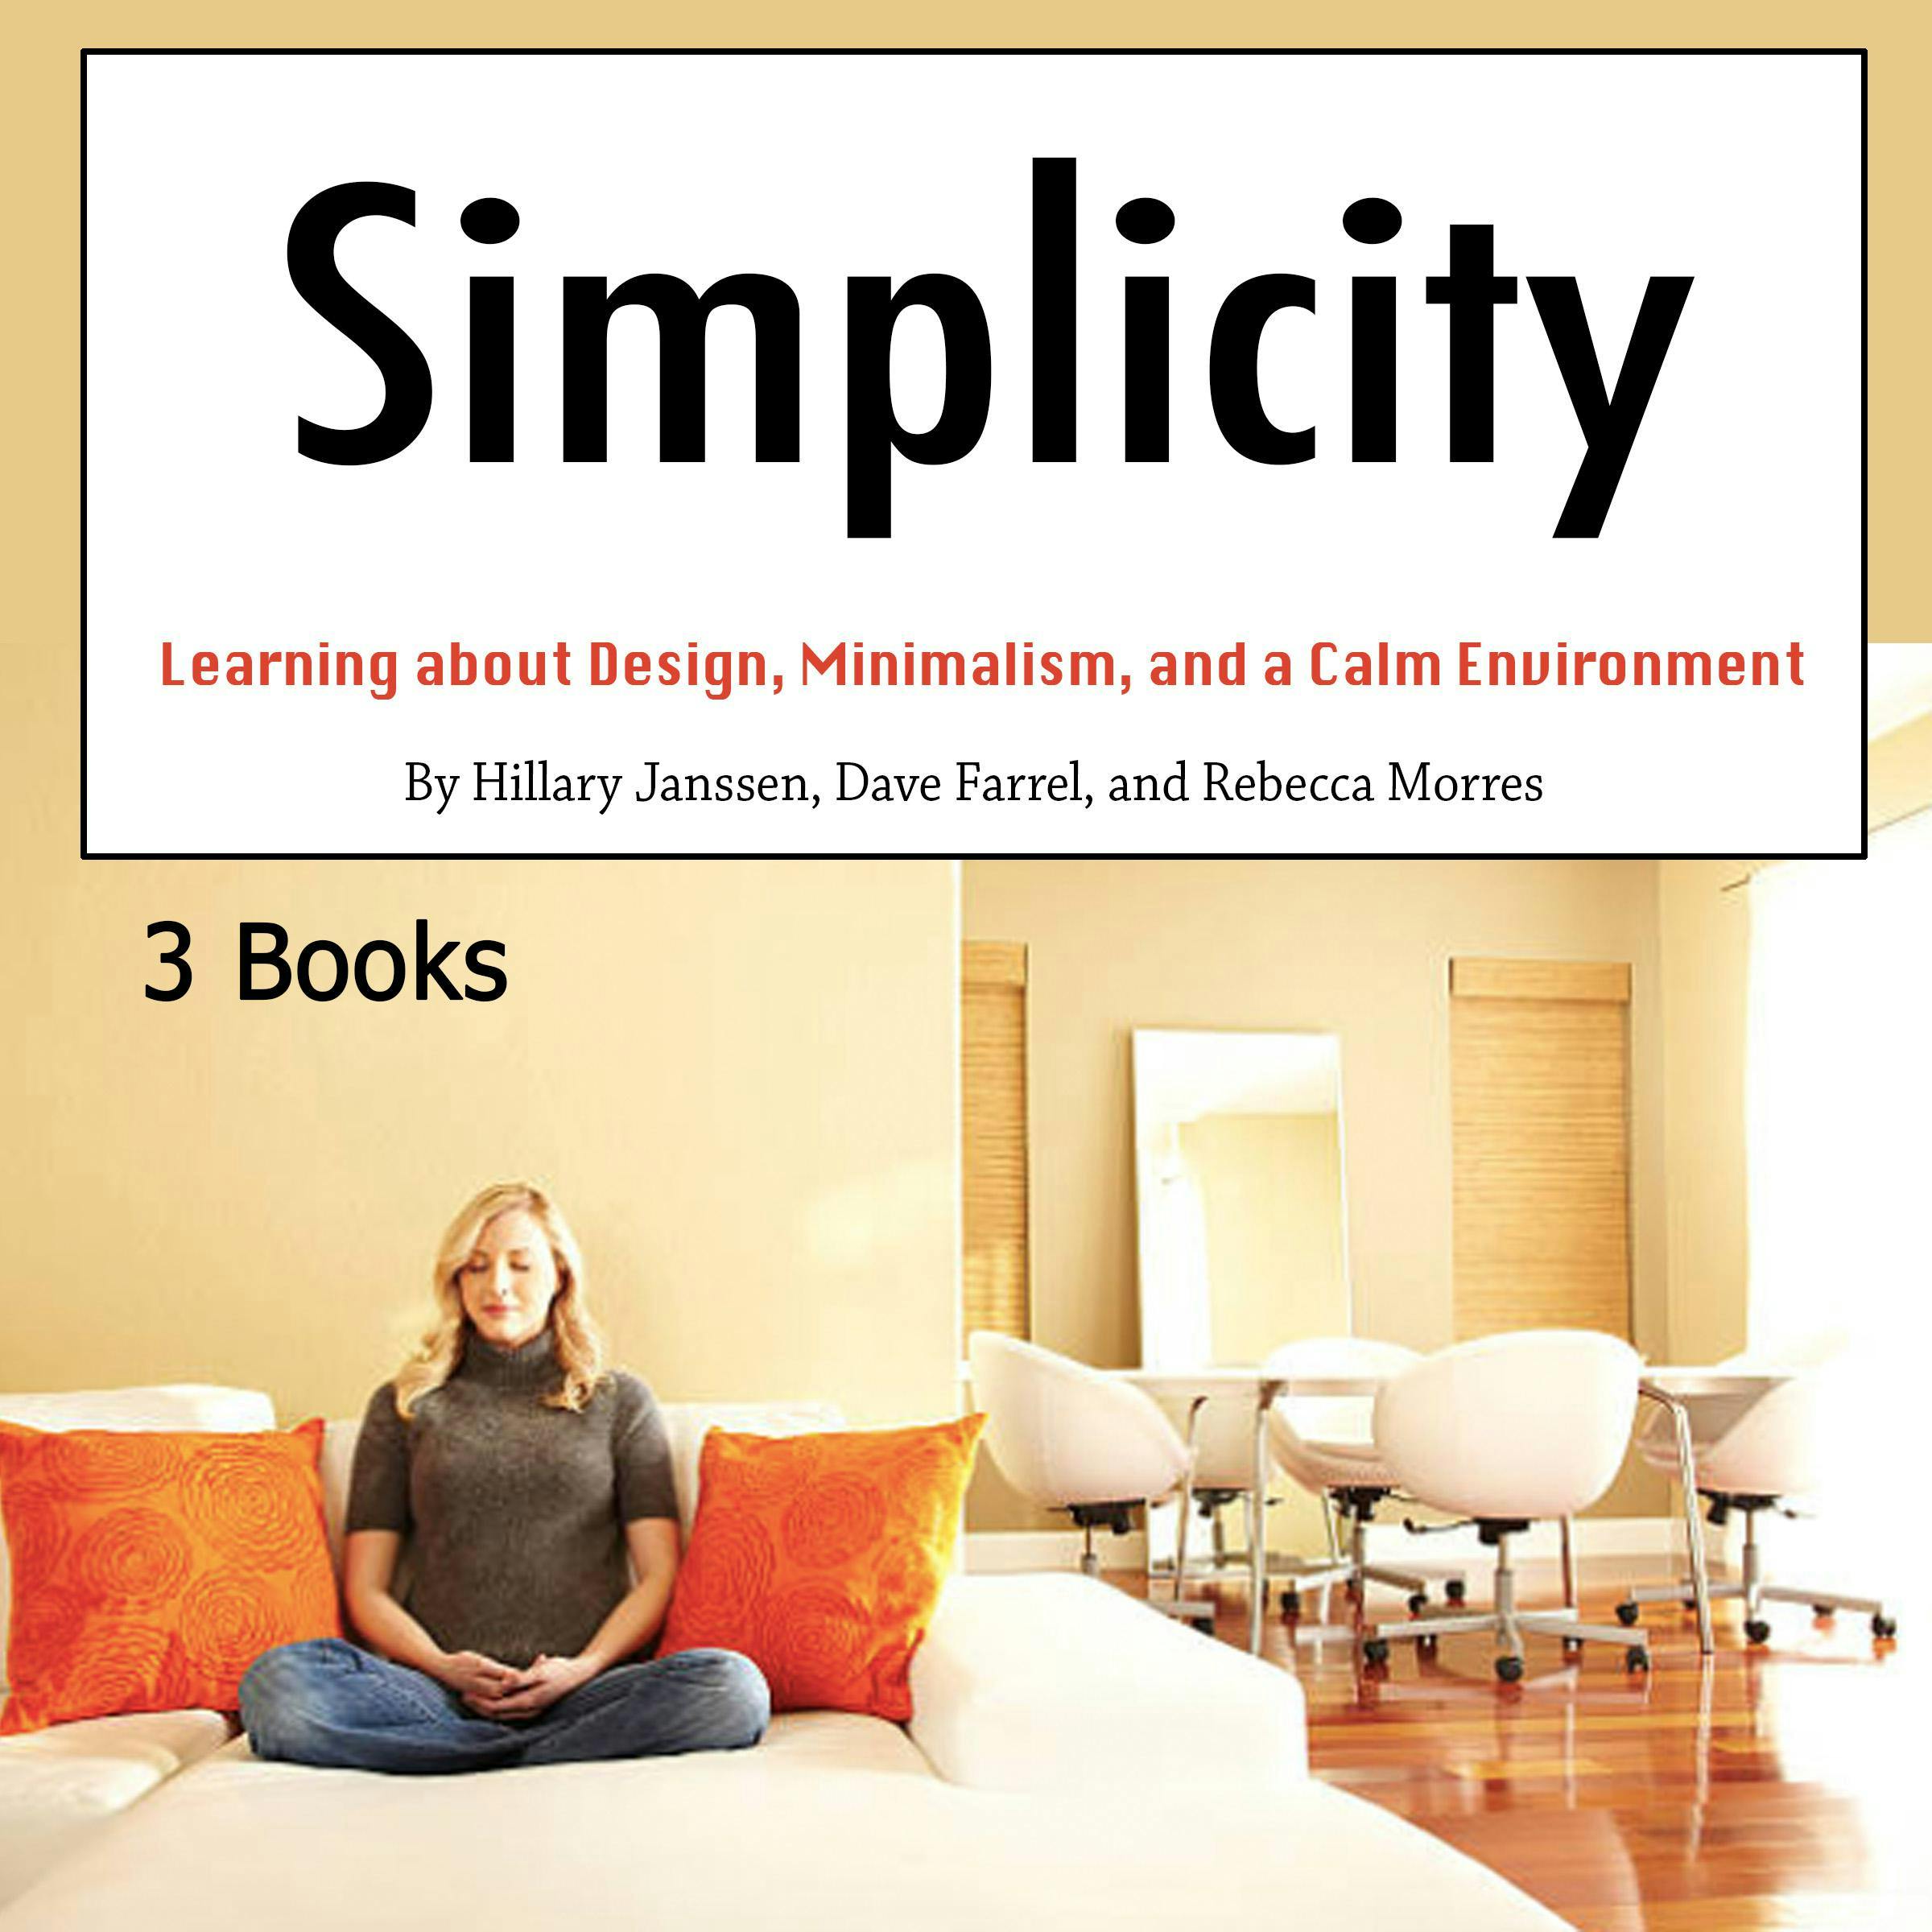 Simplicity: Learning about Design, Minimalism, and a Calm Environment - undefined